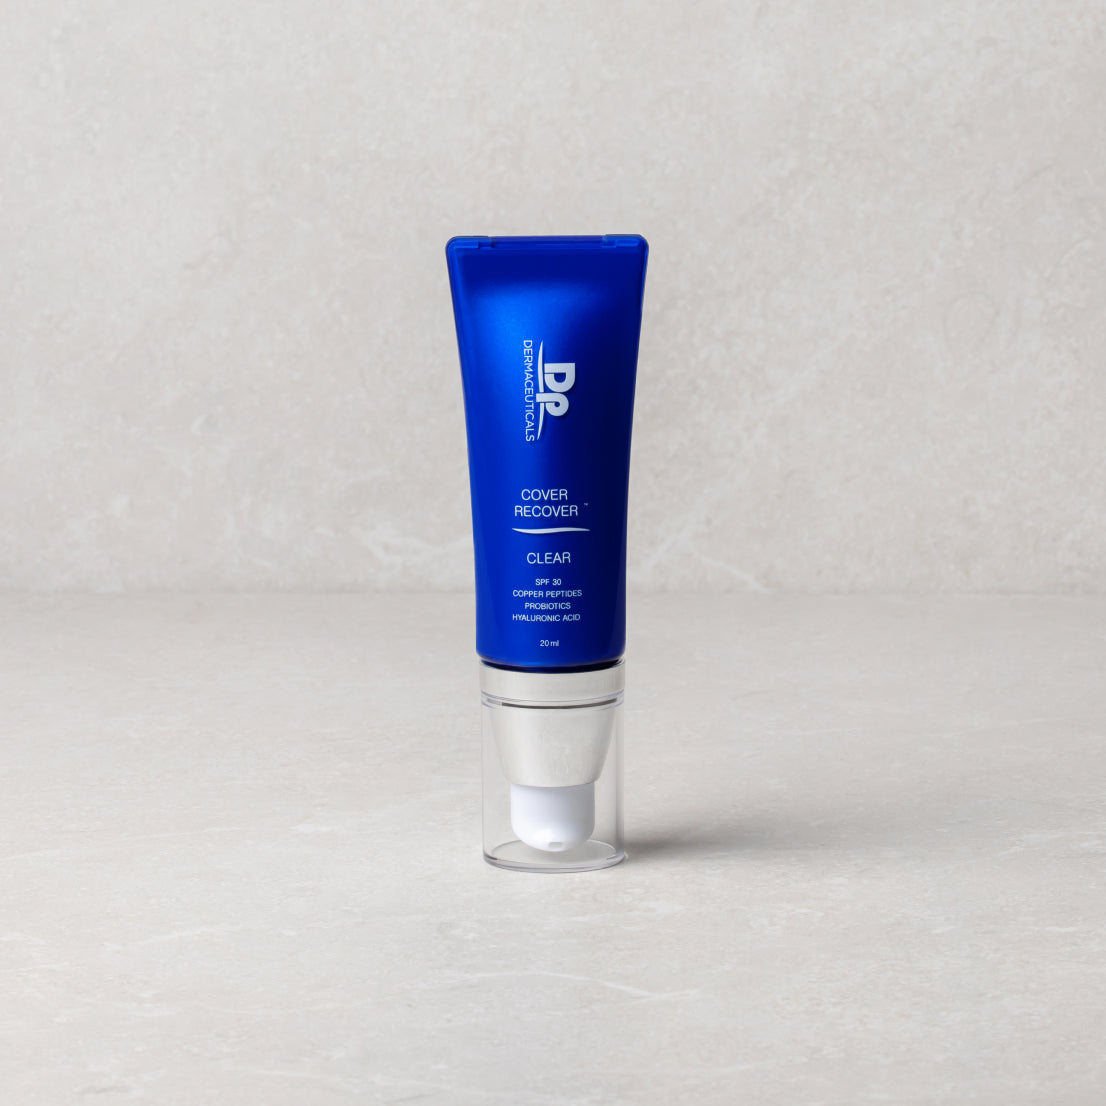 COVER RECOVER SPF